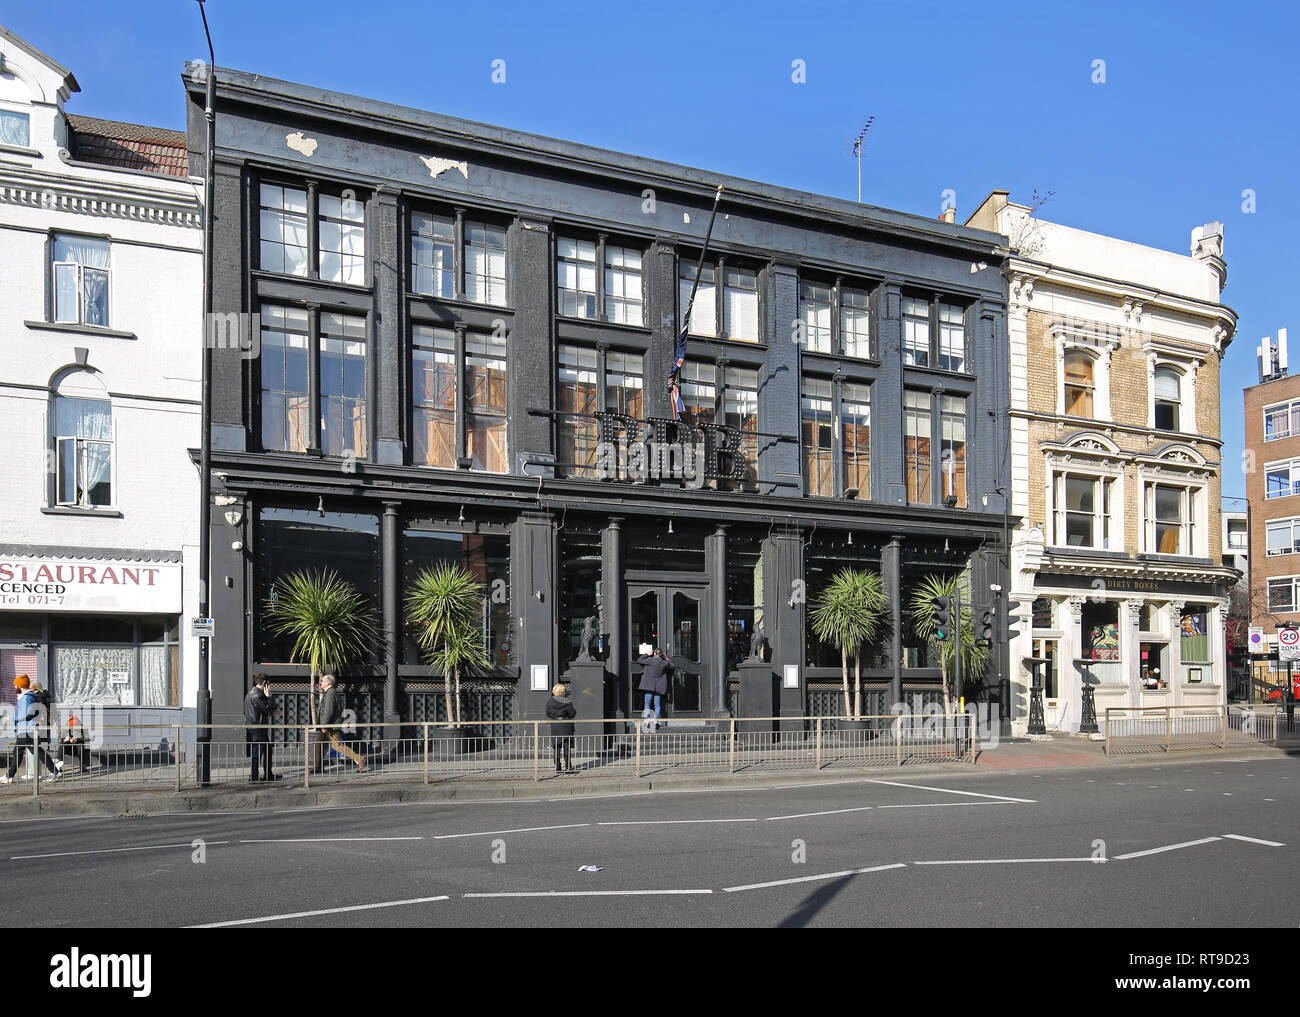 The BBB Bar on Bethnal Green Road, Shoreditch, London. A trendy bar converted from a Victorian shop building - typical of this newly fashionable area. Stock Photo